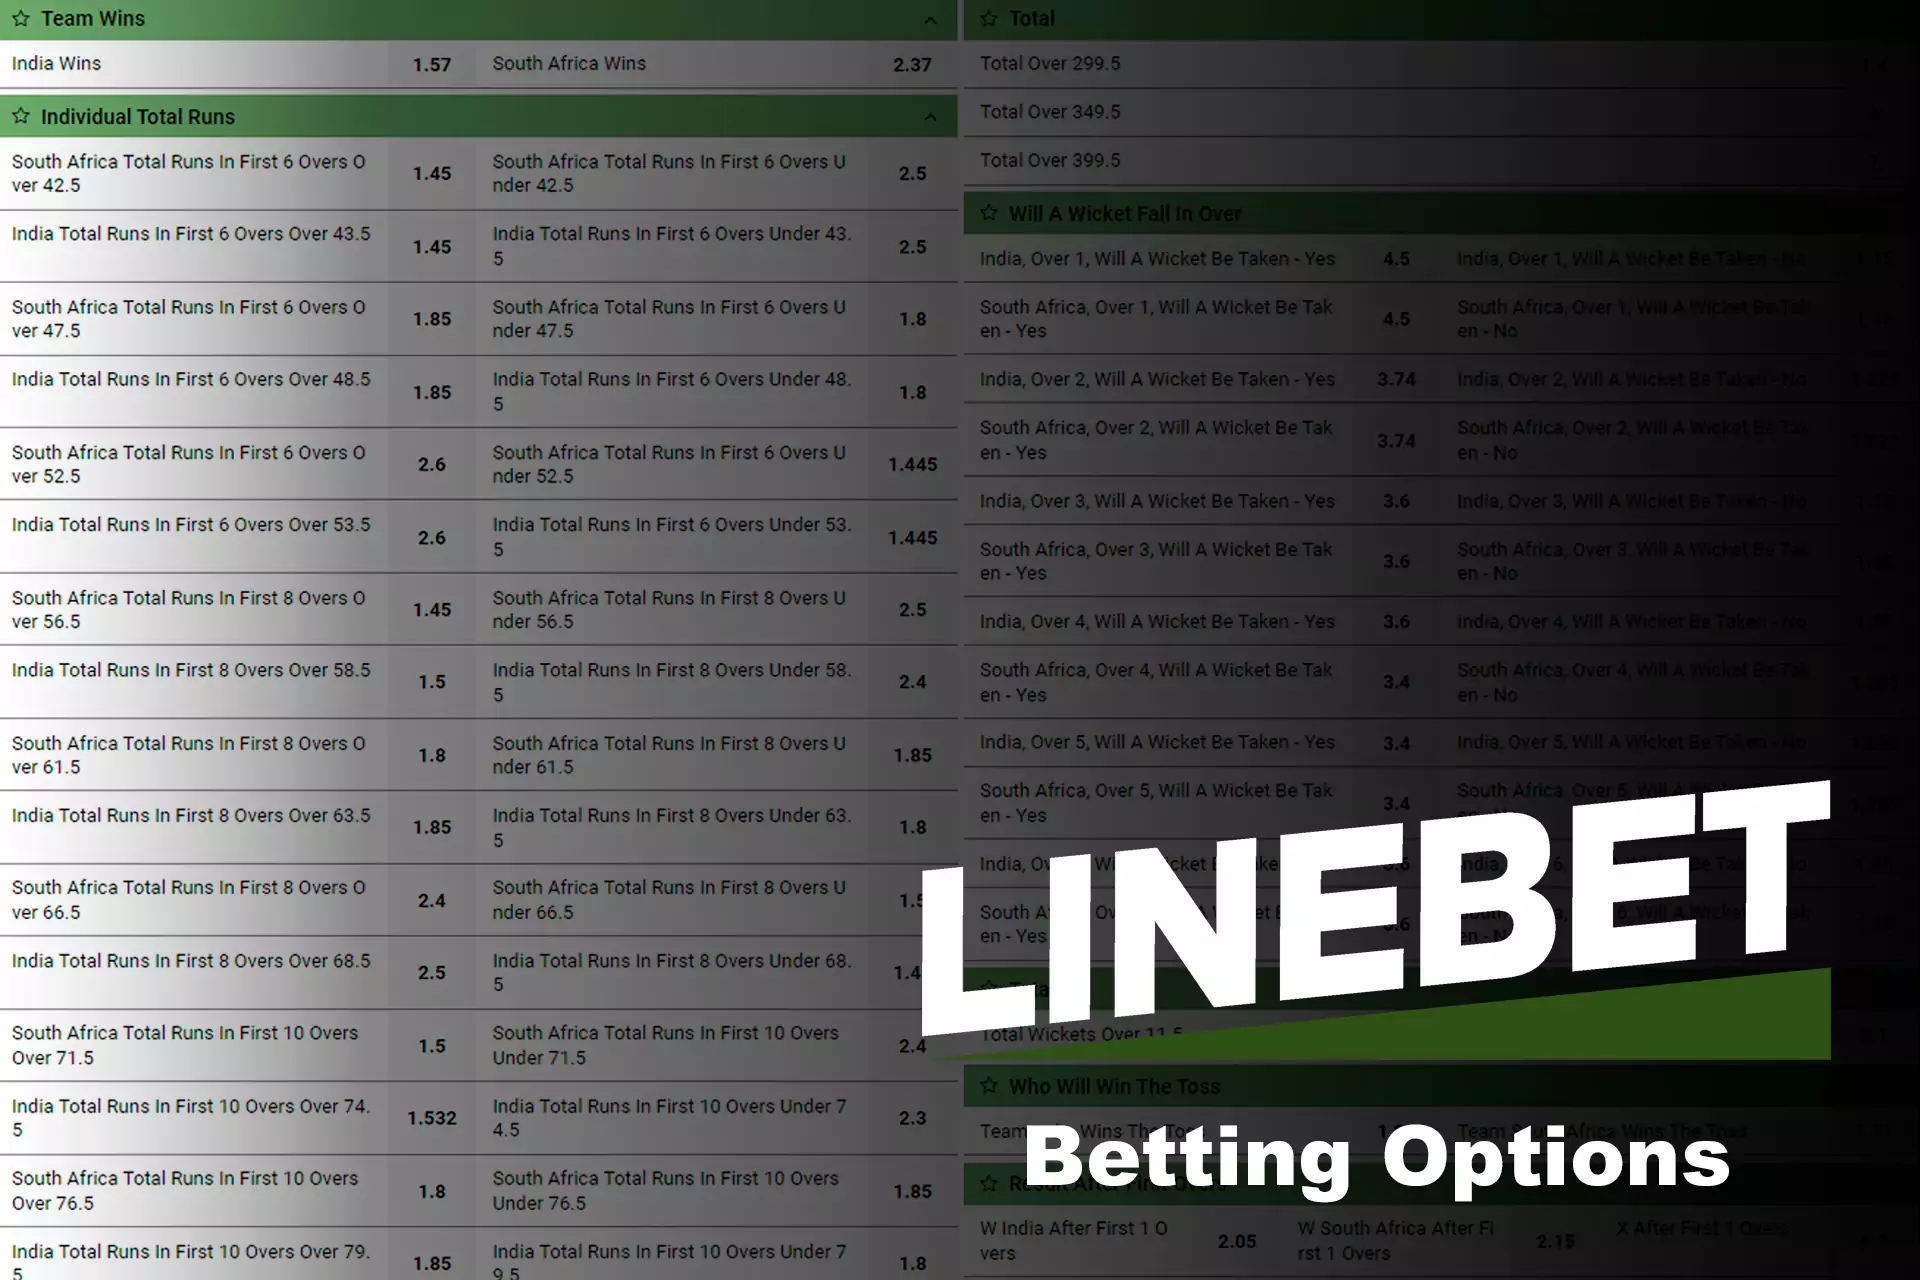 Users of Linebet can choose between different betting options.